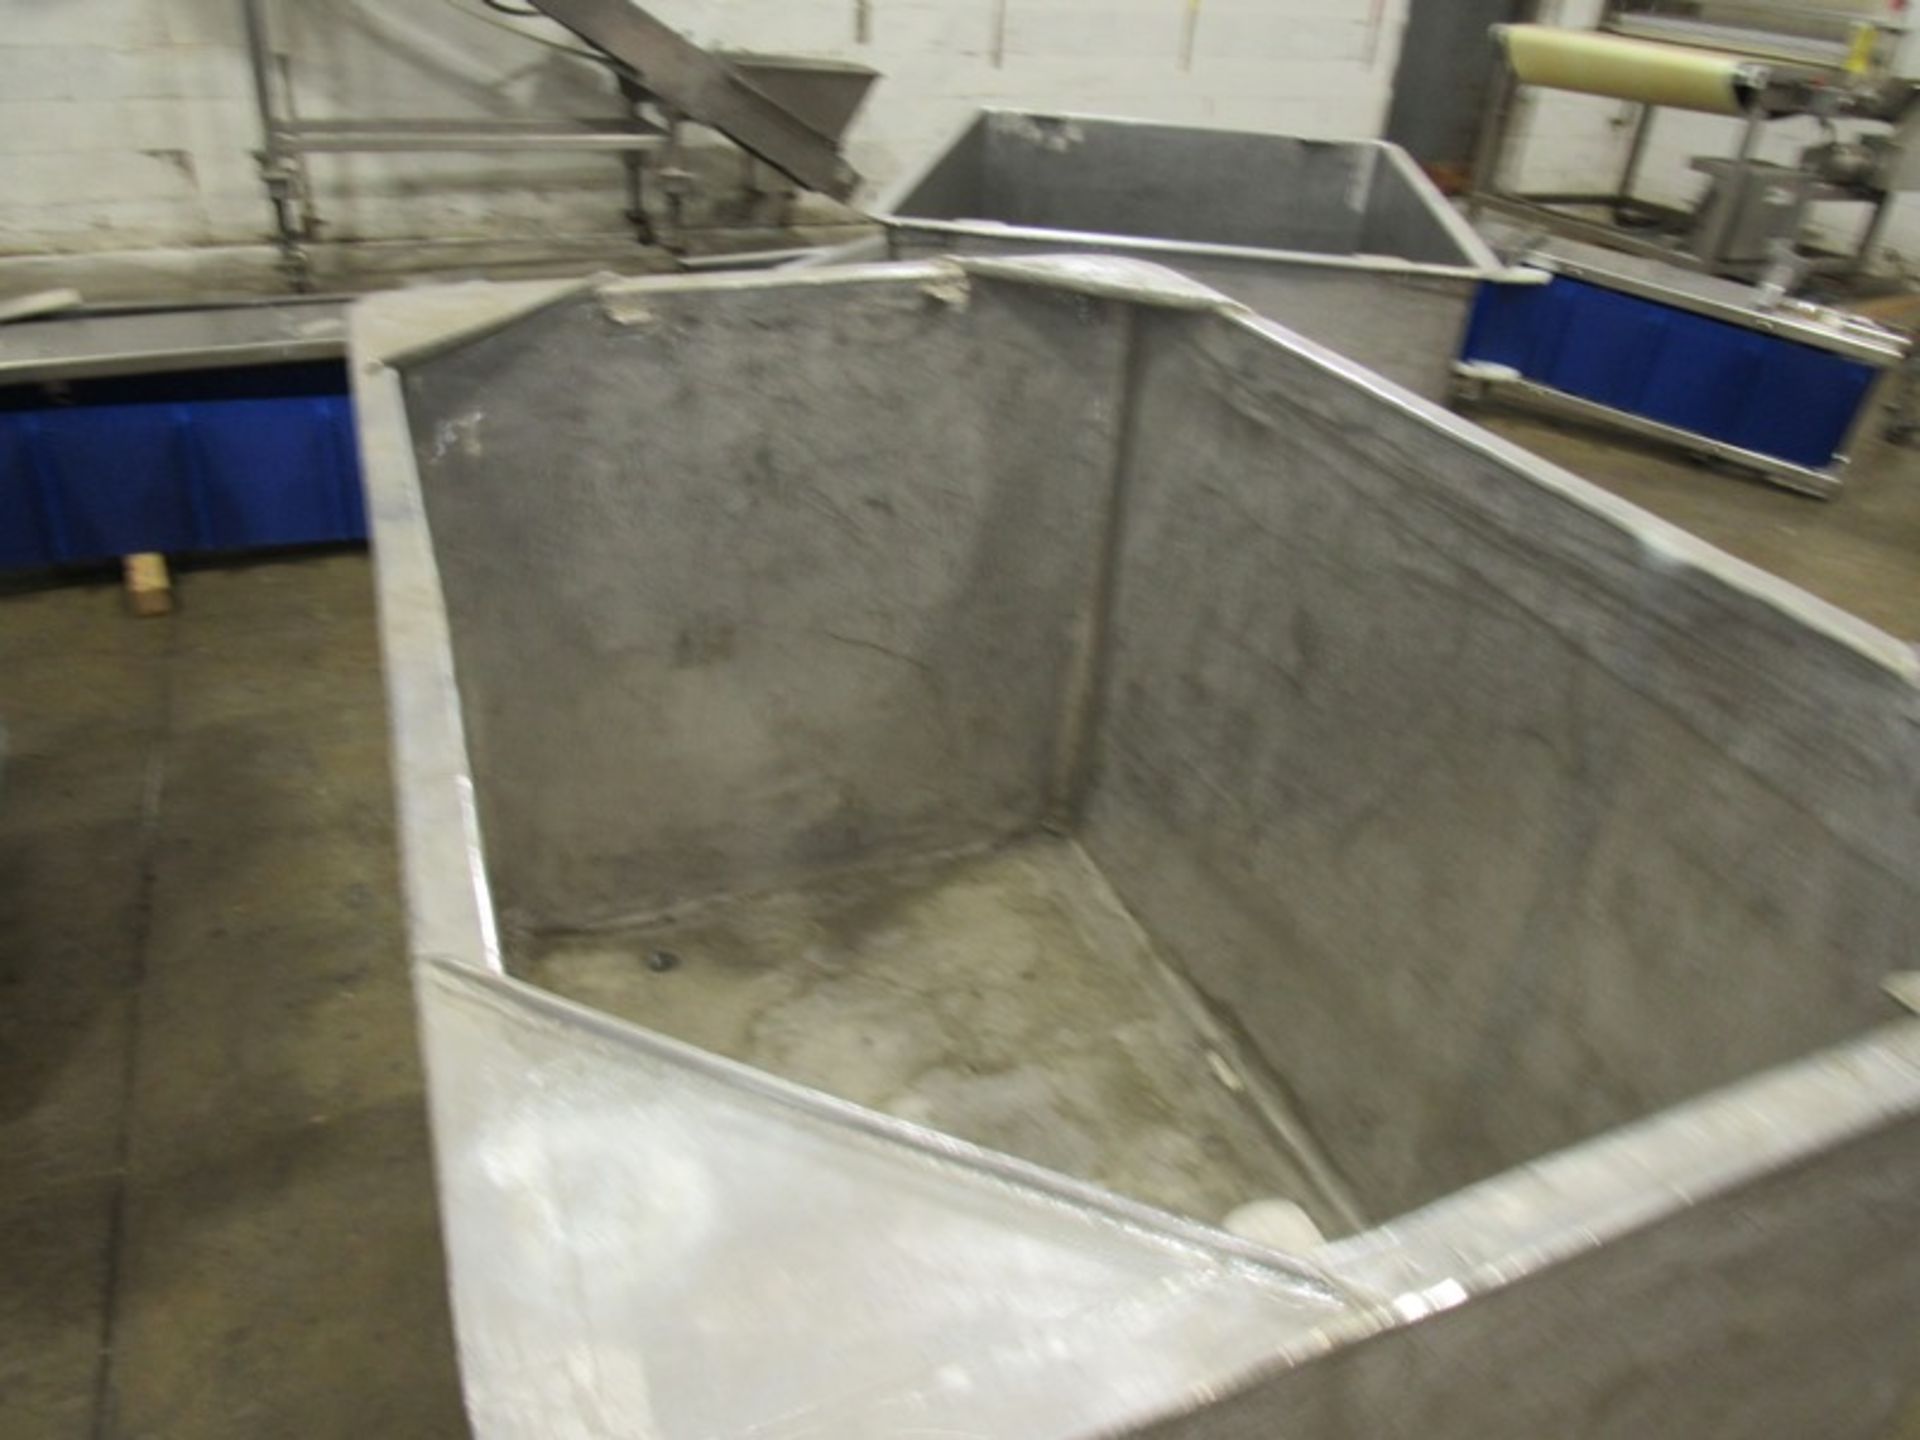 Lot Stainless Steel Vats, (1) 36" W X 48" L X 36" D & (1) 36" W X 53" L X 36" D, Located in Plano, - Image 4 of 4